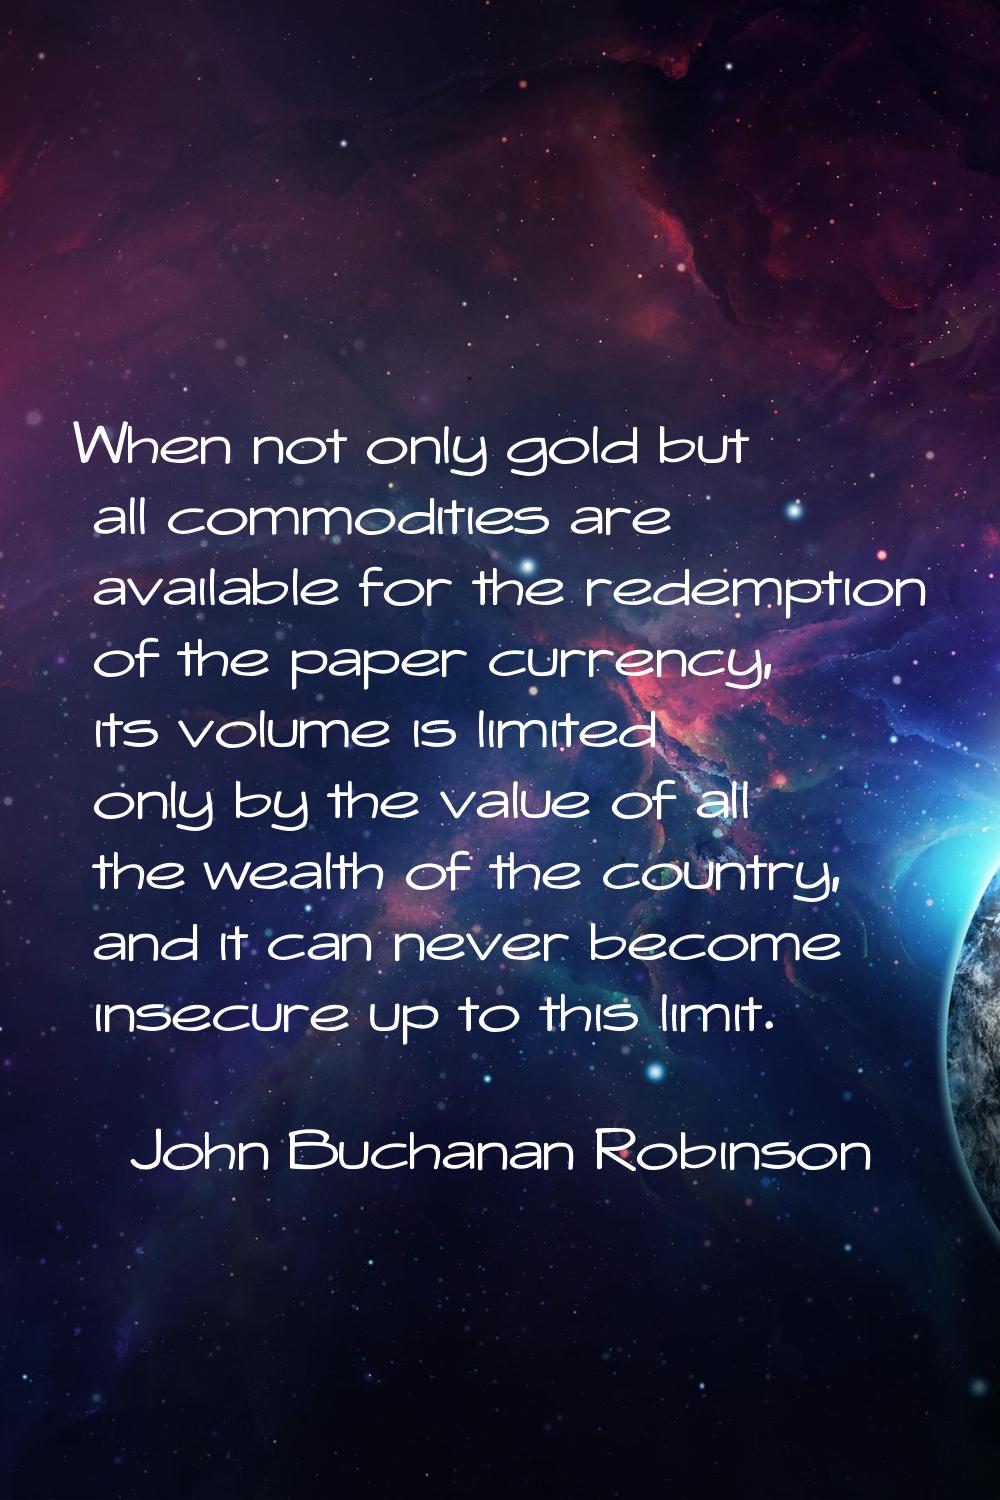 When not only gold but all commodities are available for the redemption of the paper currency, its 